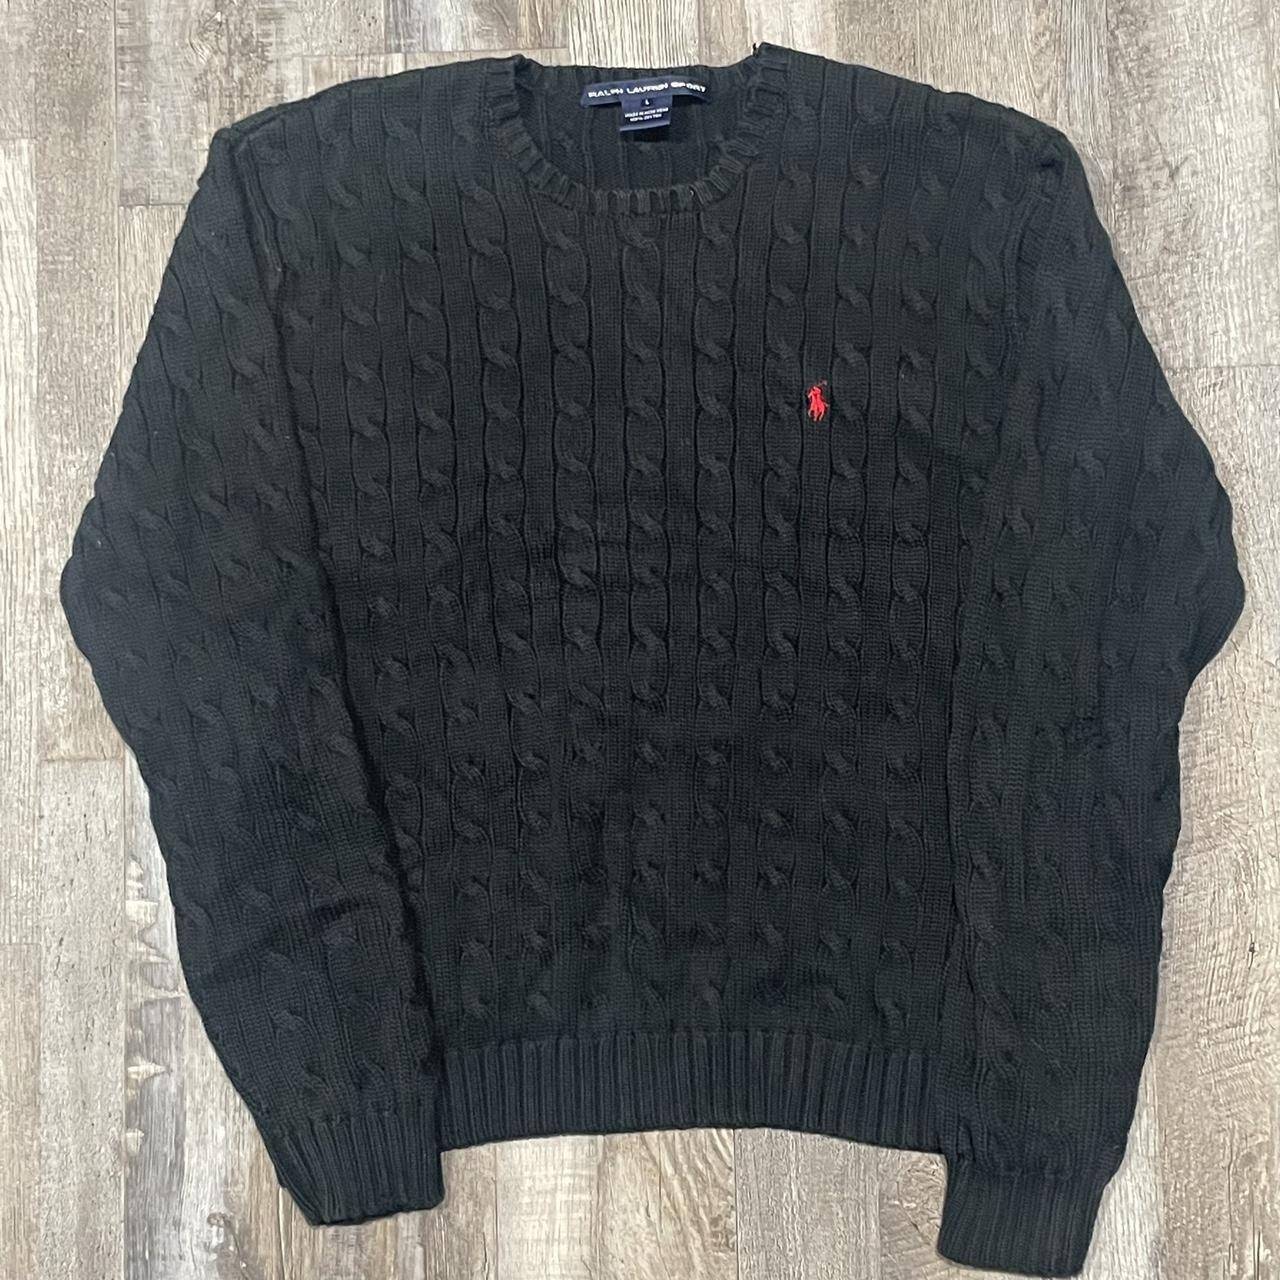 item listed by preppyestatefinds